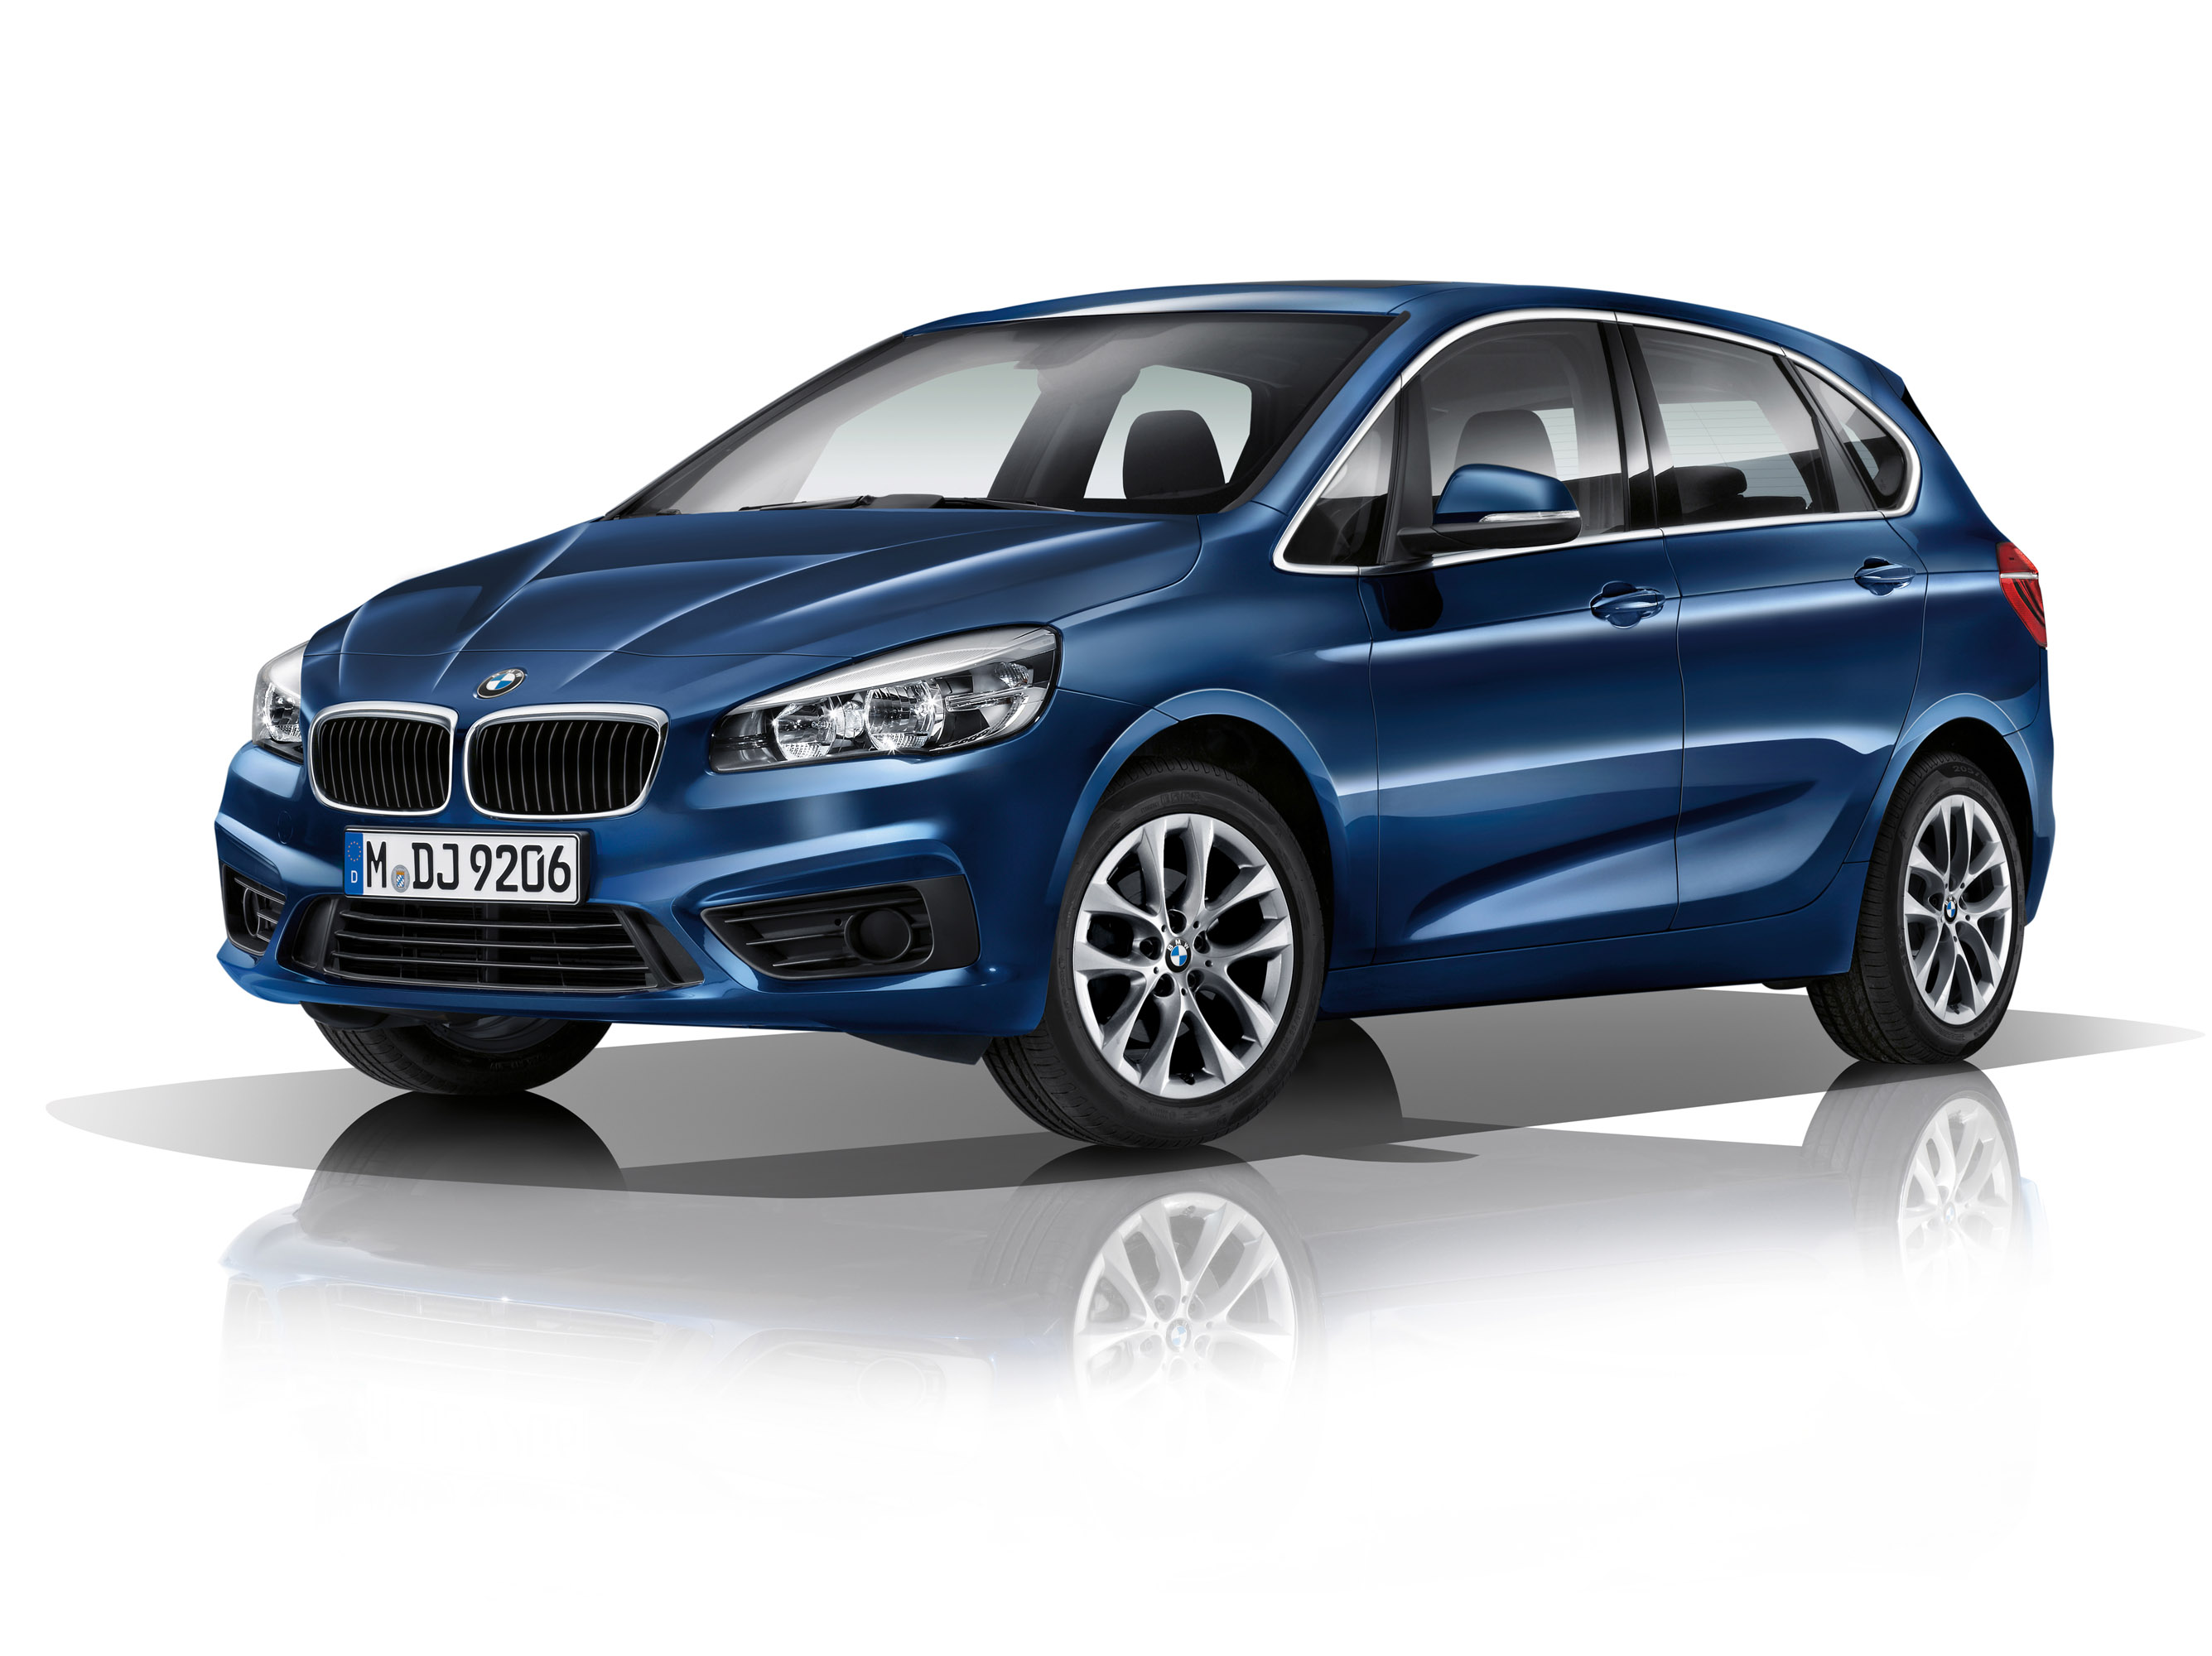 2015 Bmw 2 Series Active Tourer M Sportpackage Hd Pictures